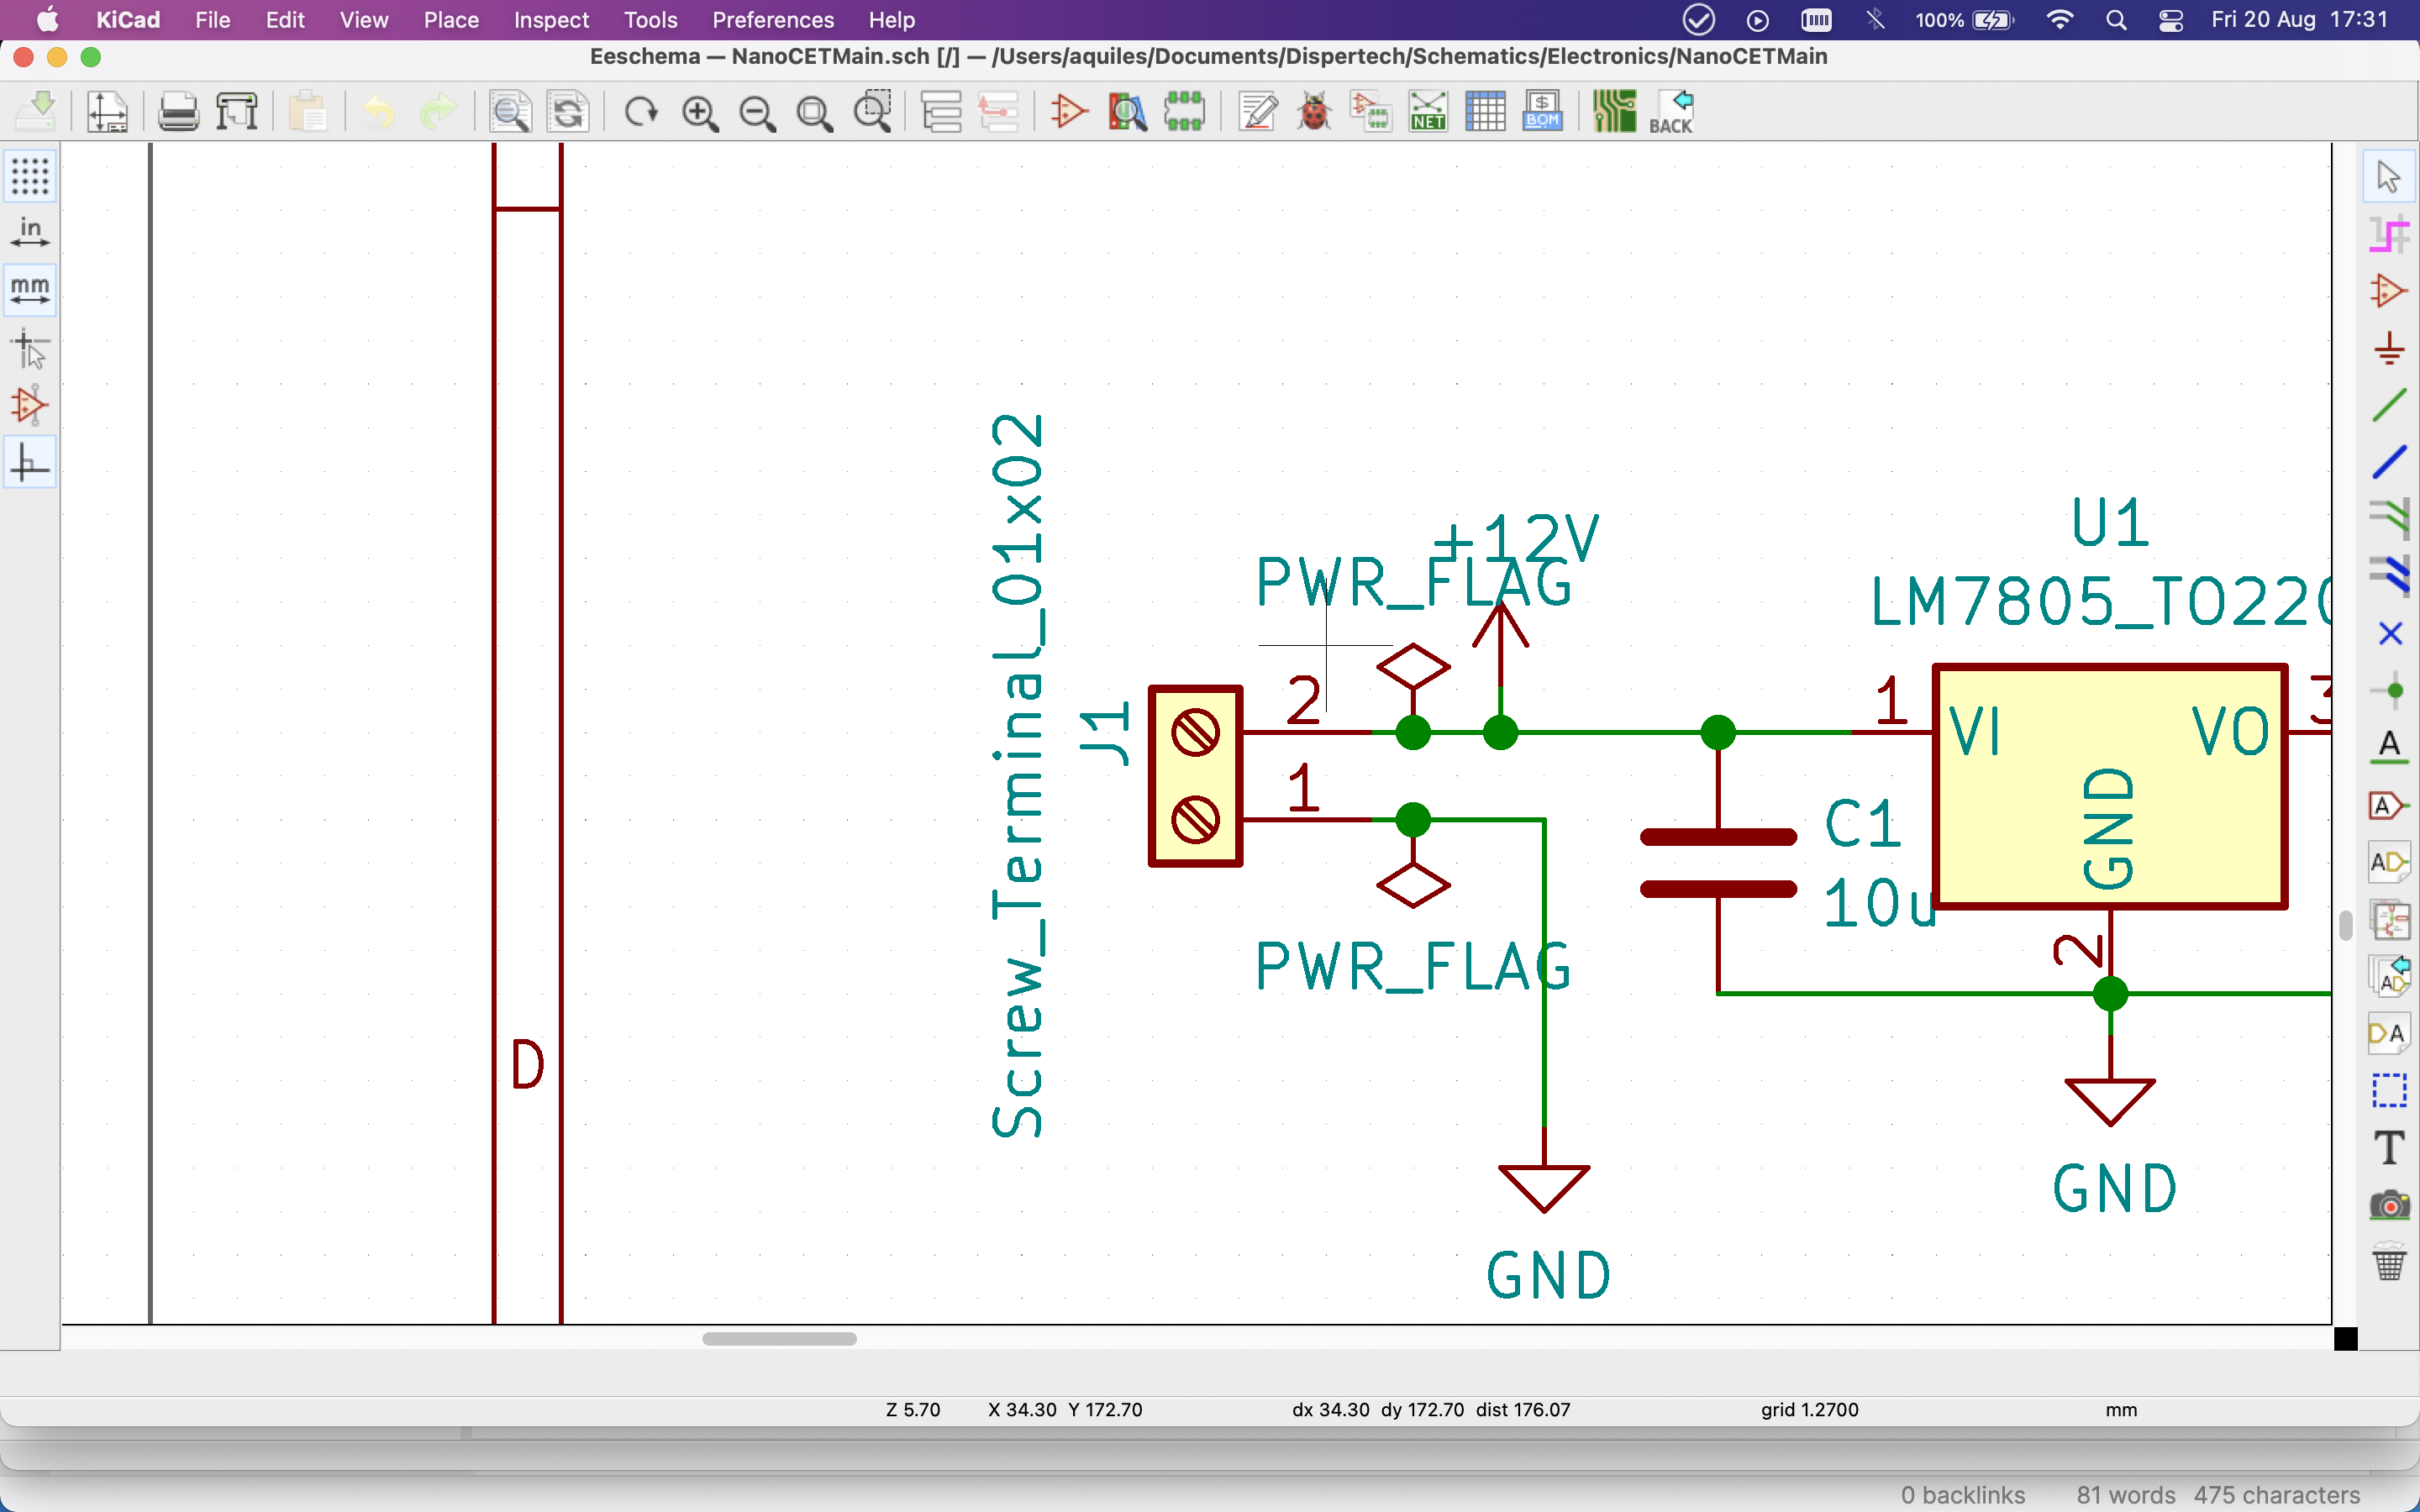 Adding the PWR_Flag to the schematic